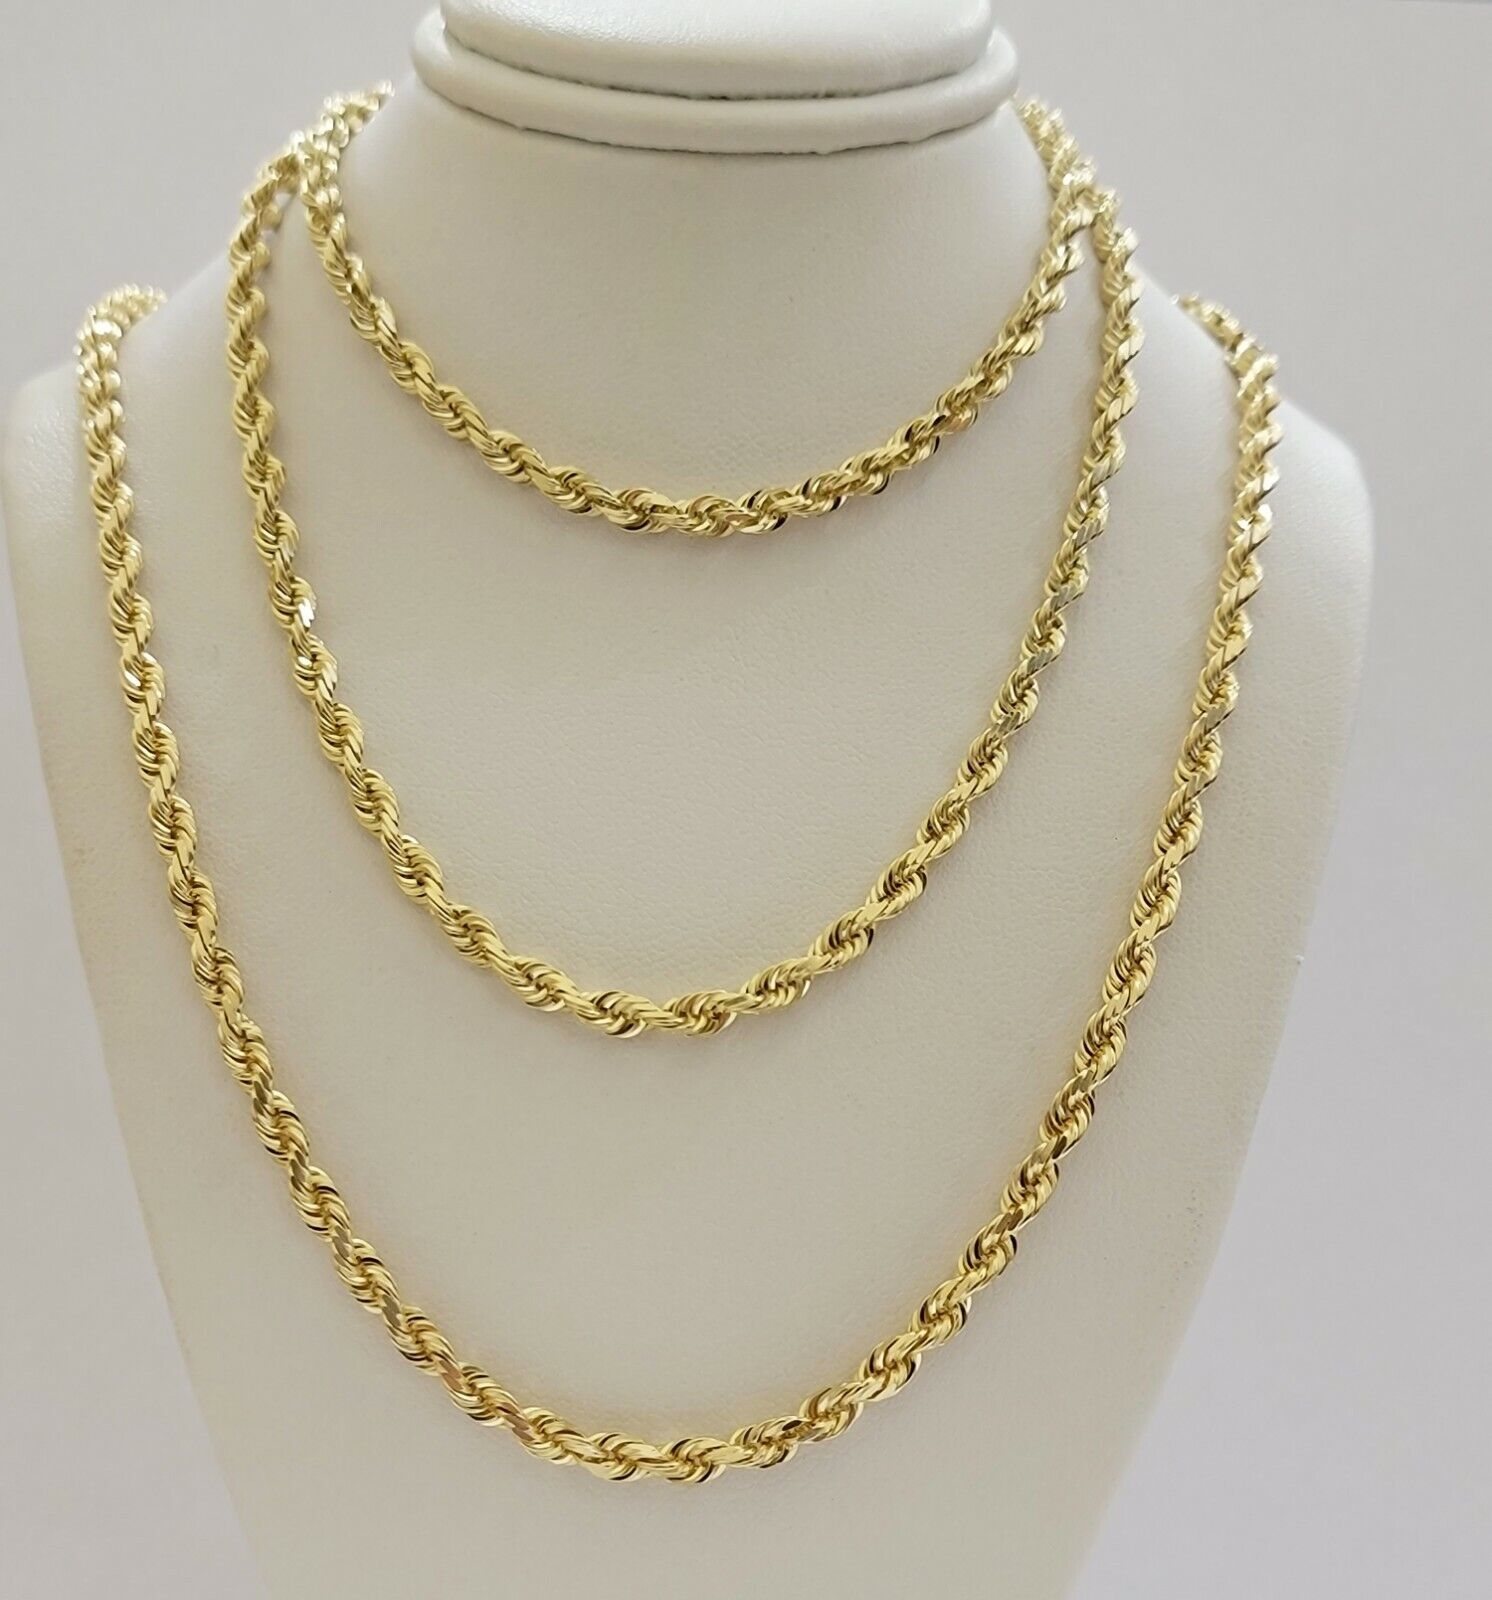 Real 10k Yellow Gold Rope Chain necklace 18 inch - 28 inch SOLID 4mm Mens Women